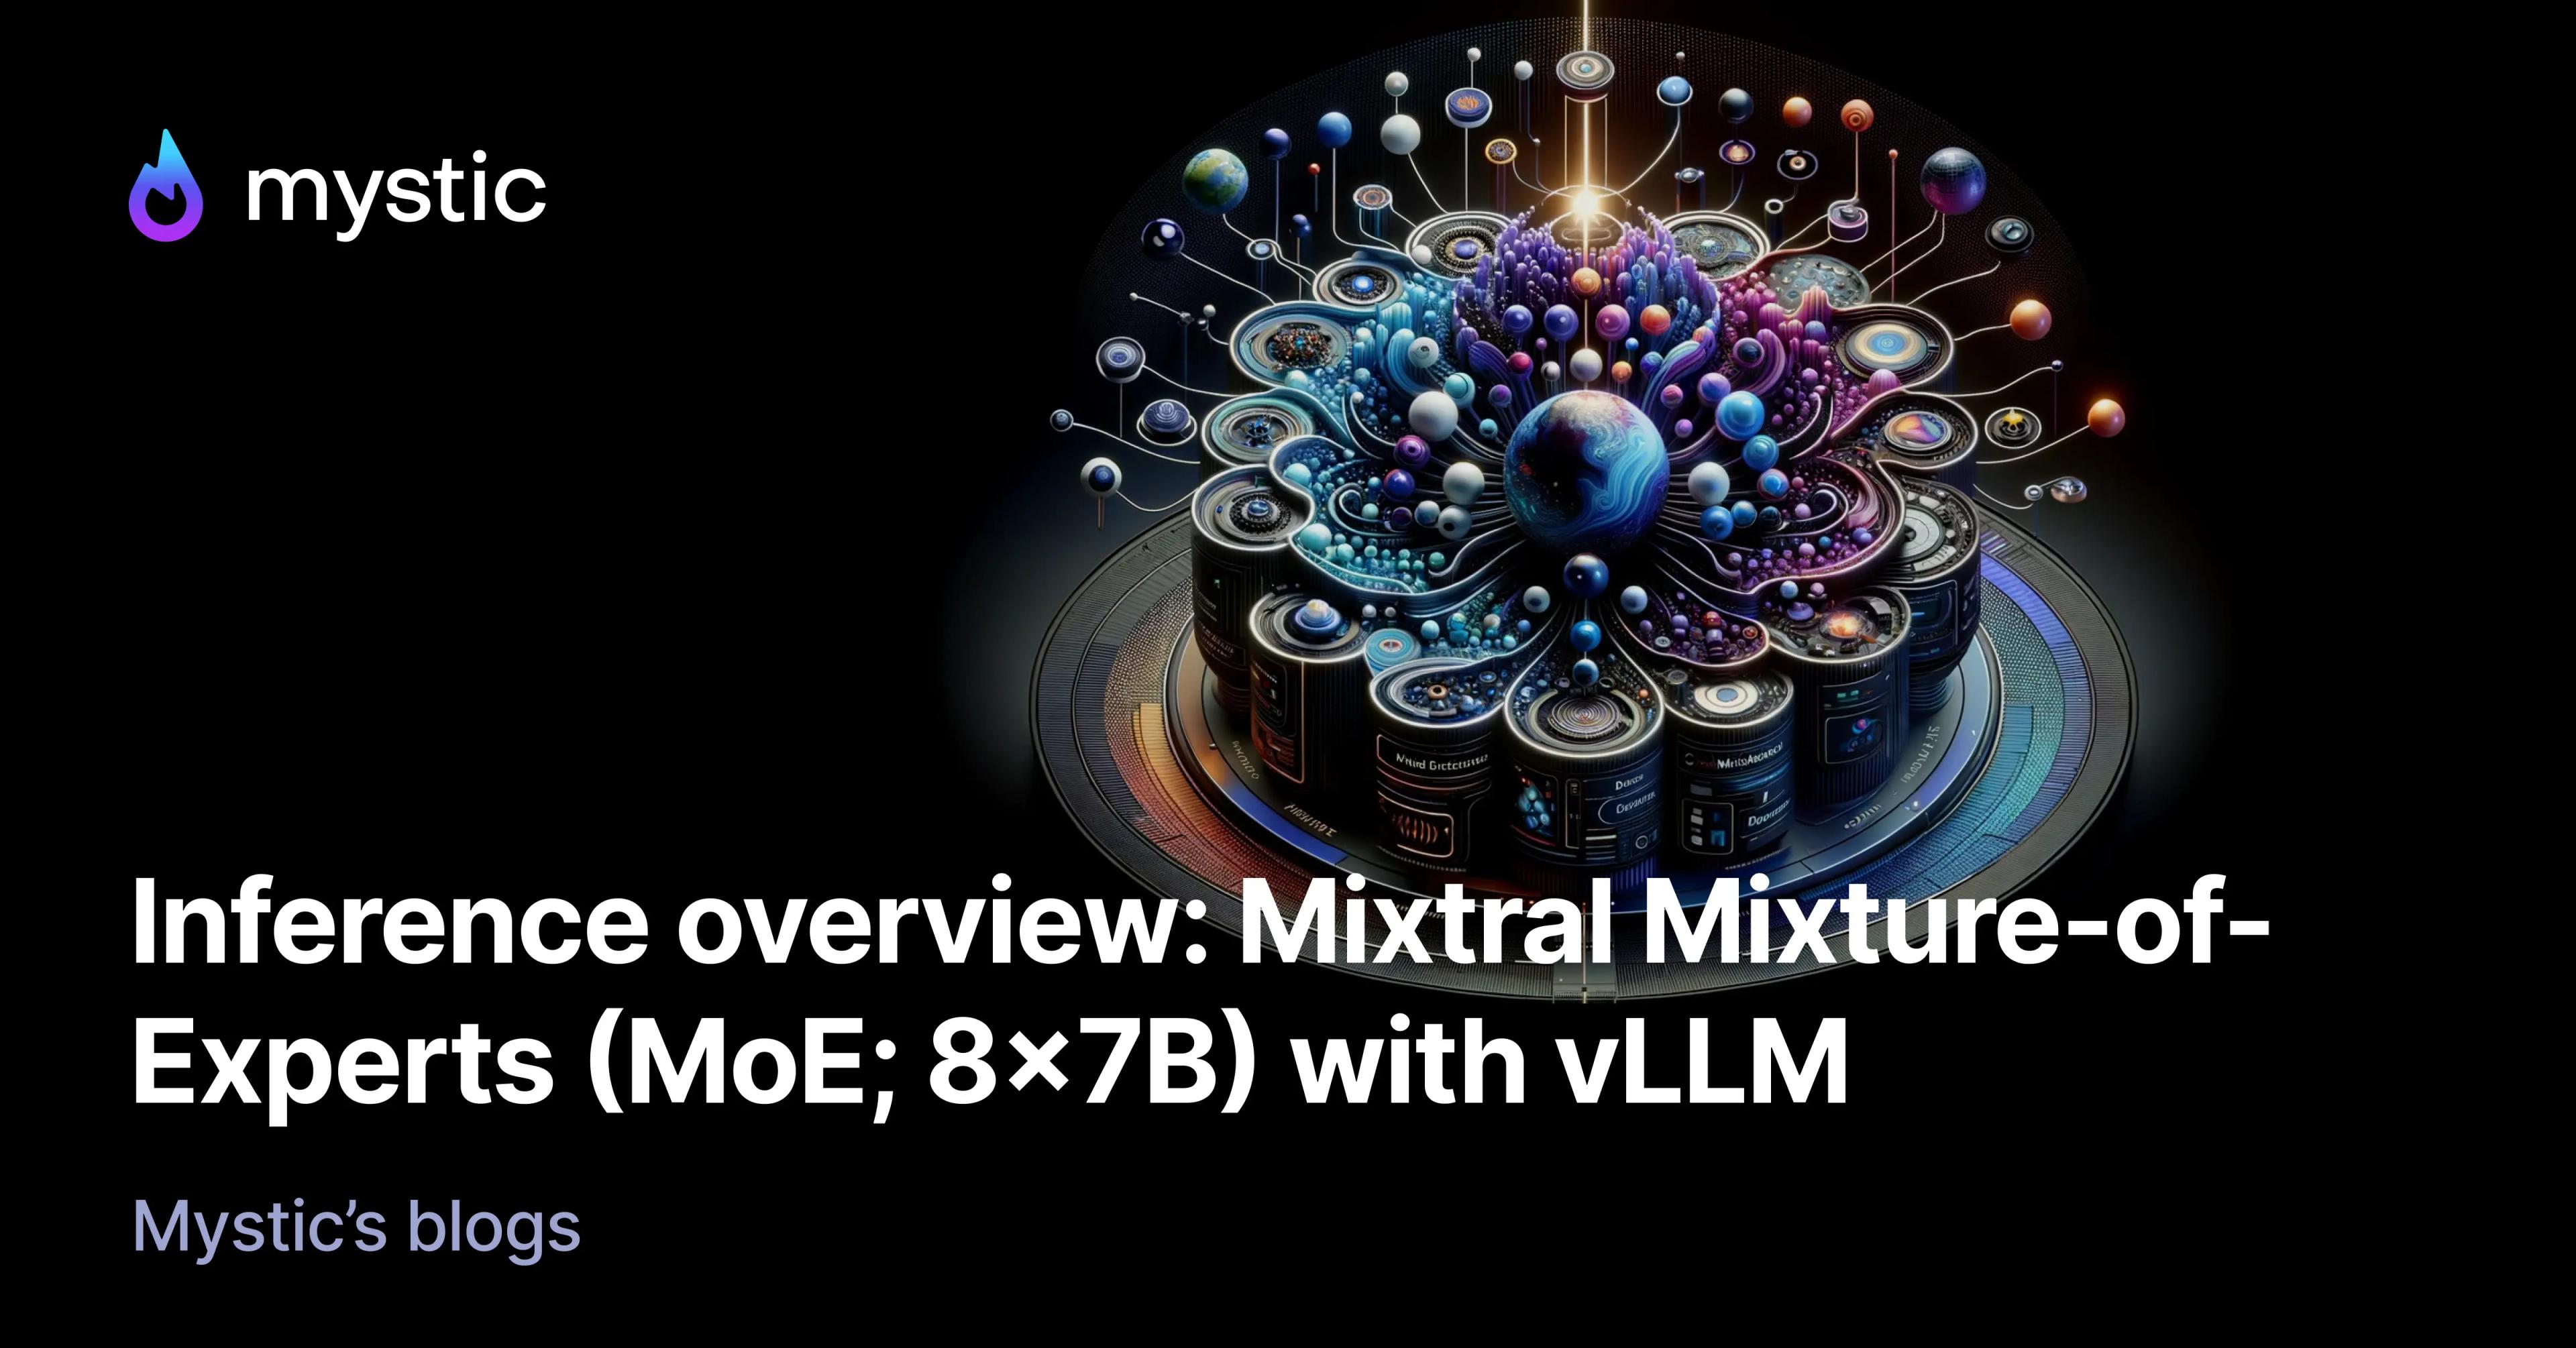 feature image for post with title: Performance overview: Mixtral Mixture-of-Experts (MoE 8x7B) with vLLM